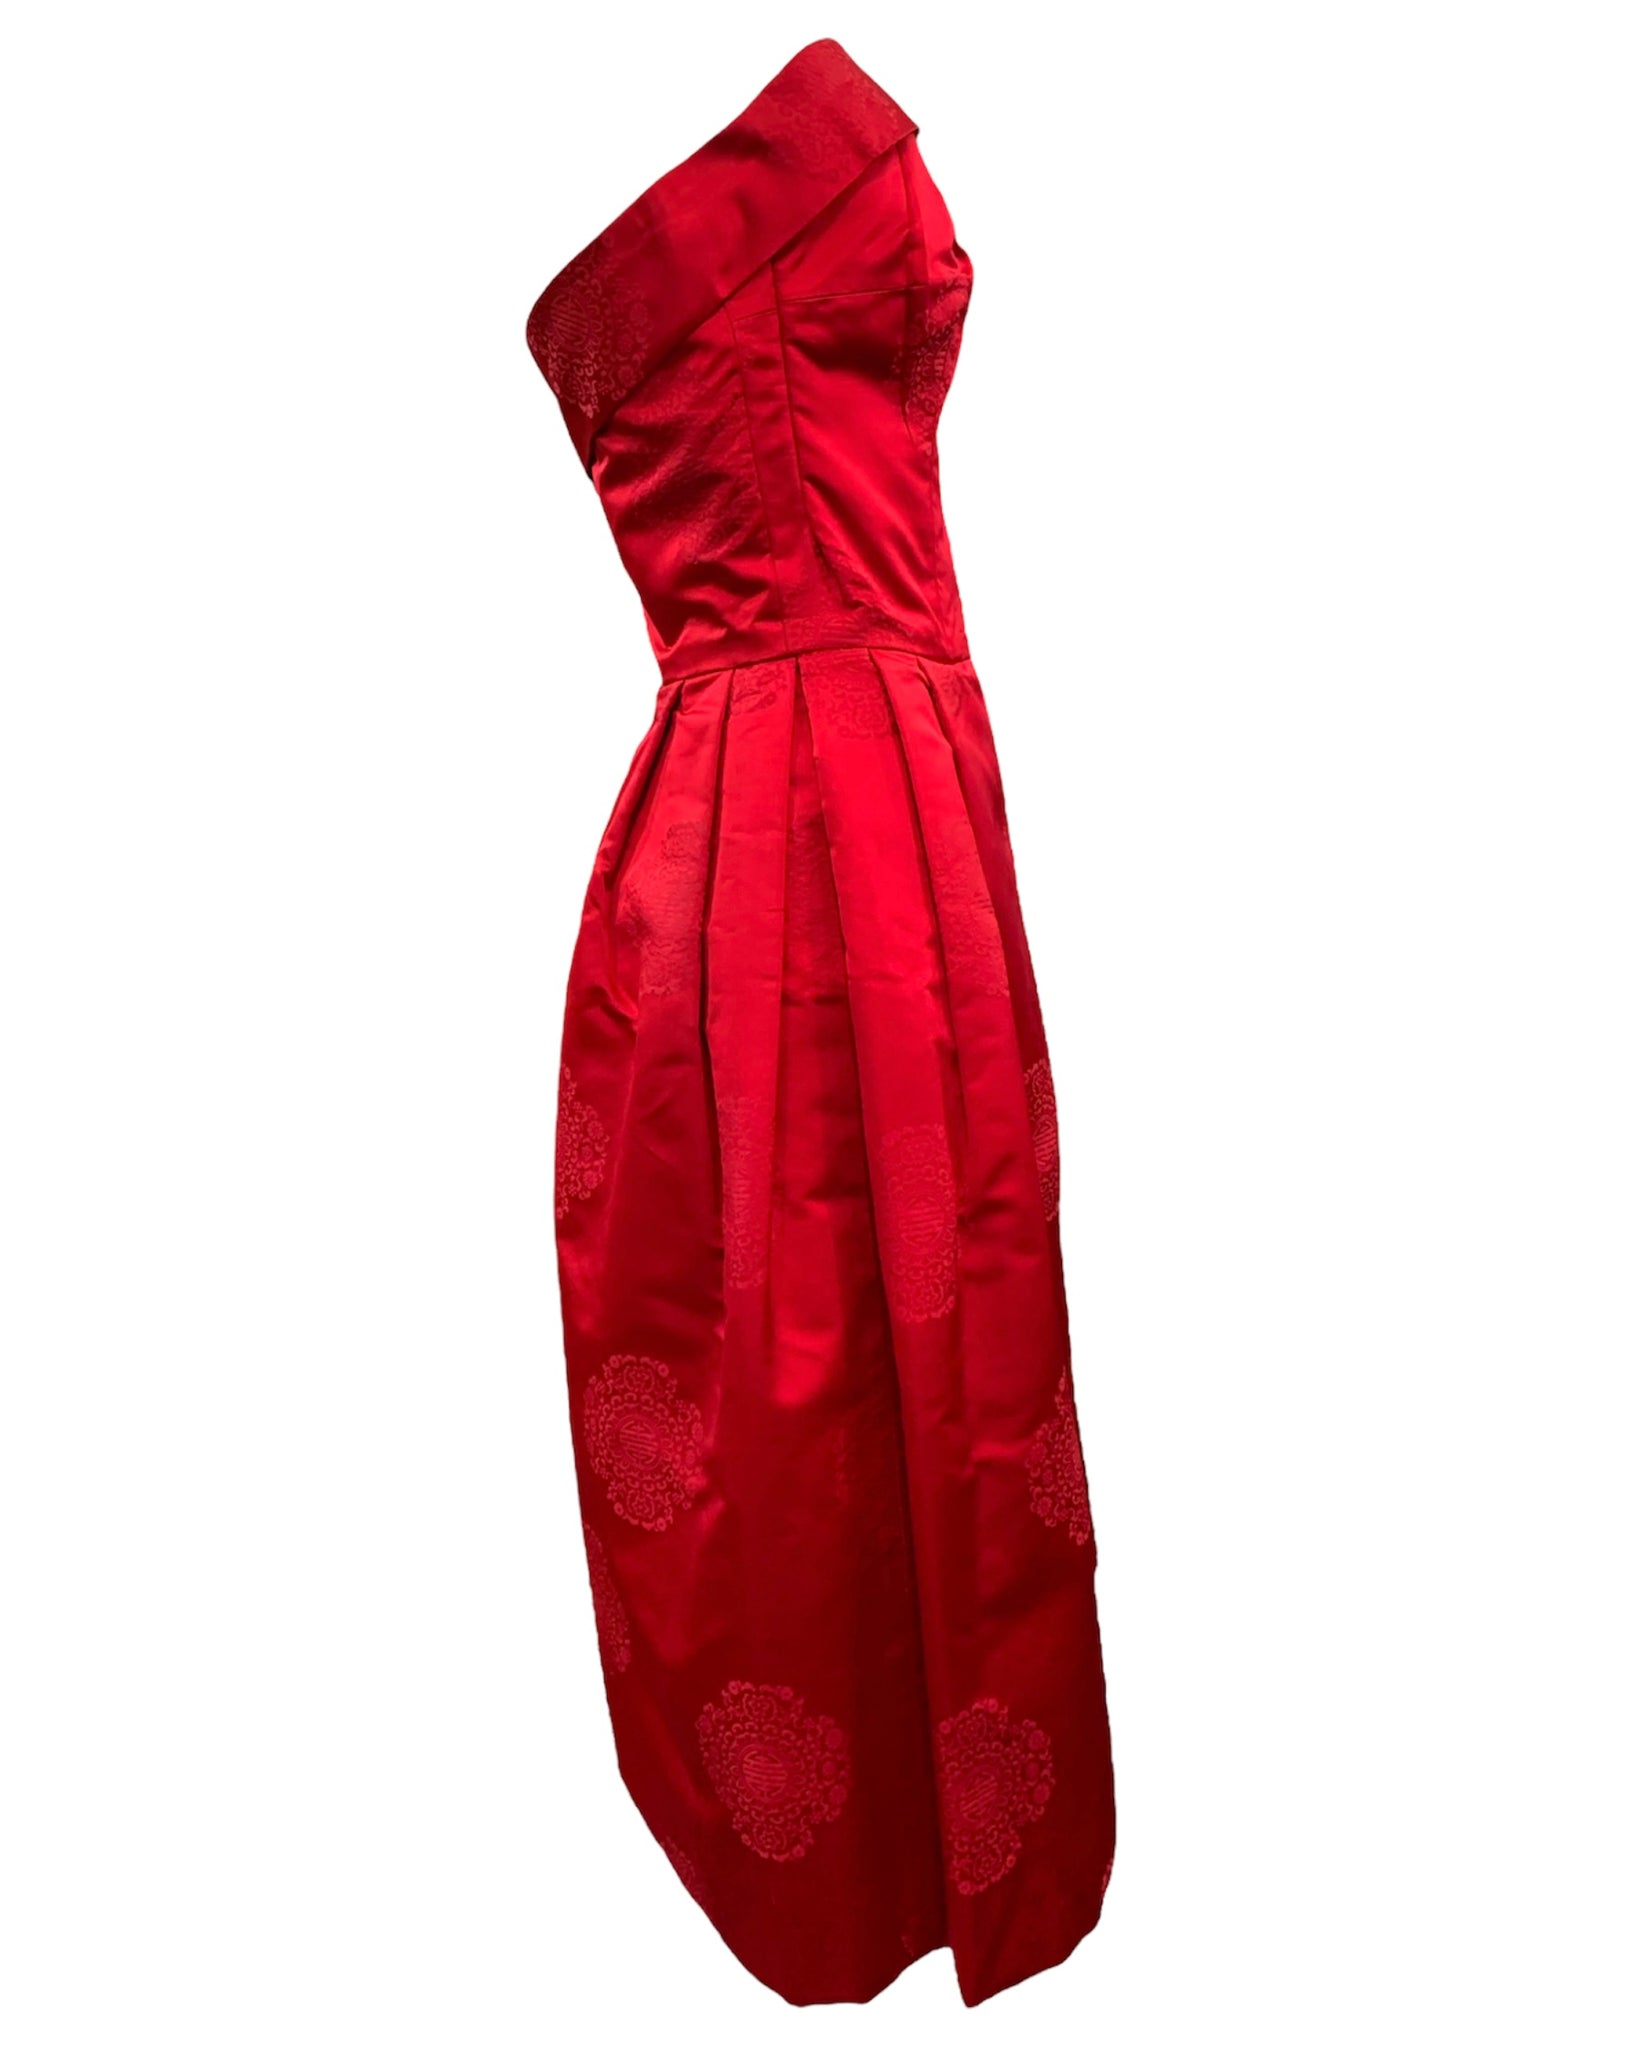 50s Red Satin Strapless Cocktail Dress SIDE 2 of 5